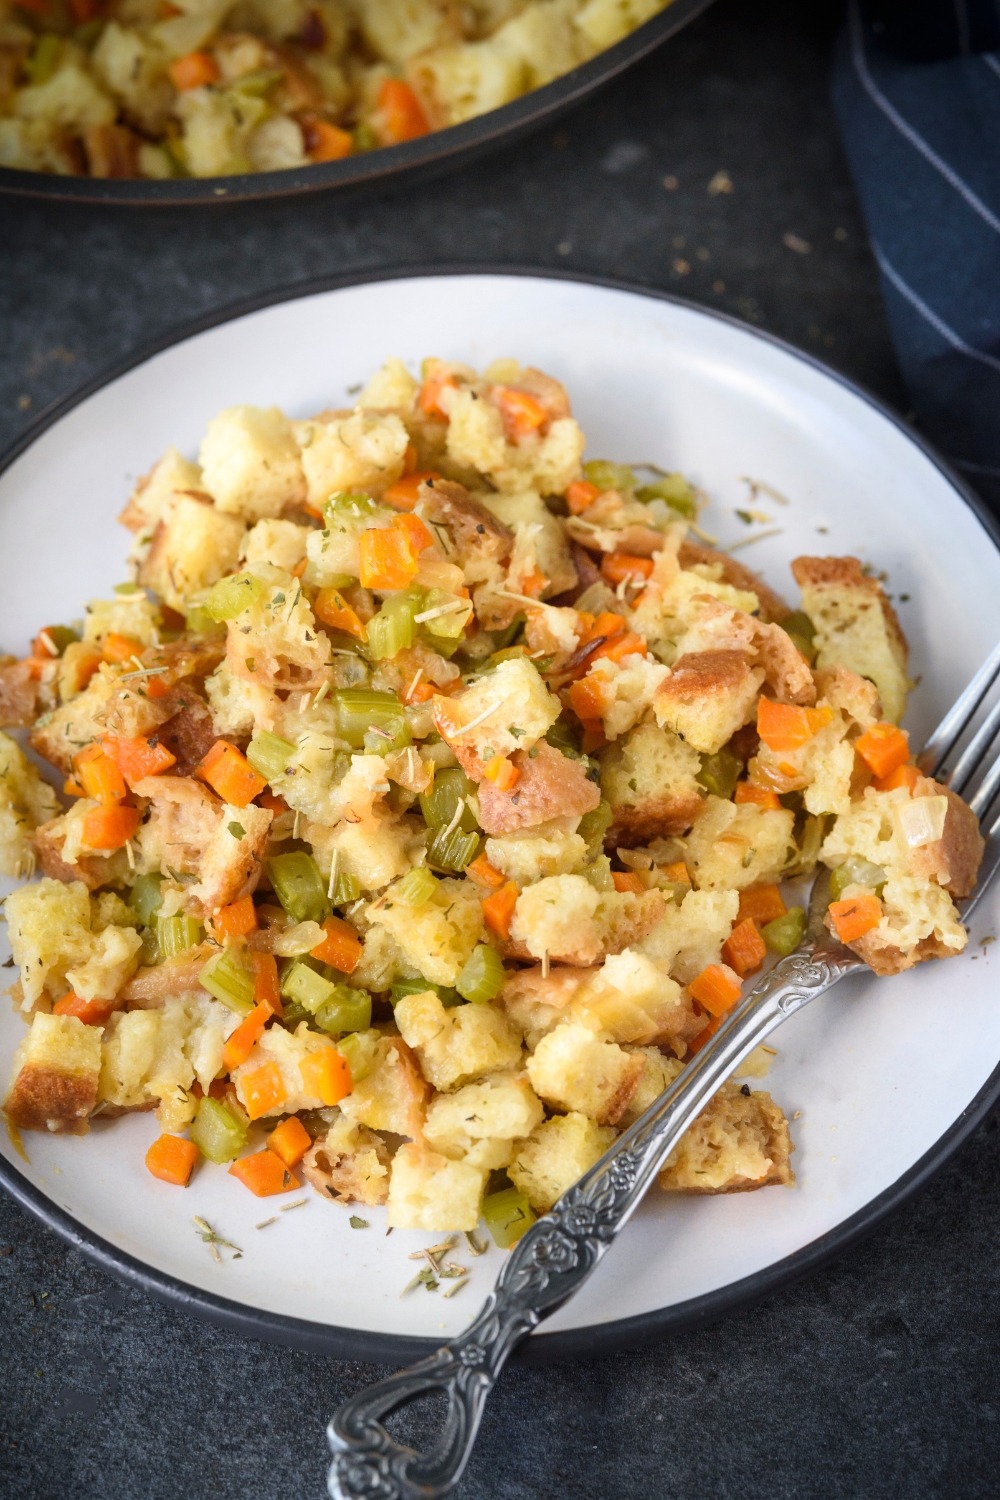 A plate of stovetop stuffing with diced celery and carrots mixed in with the stuffing. There is a fork on the plate.